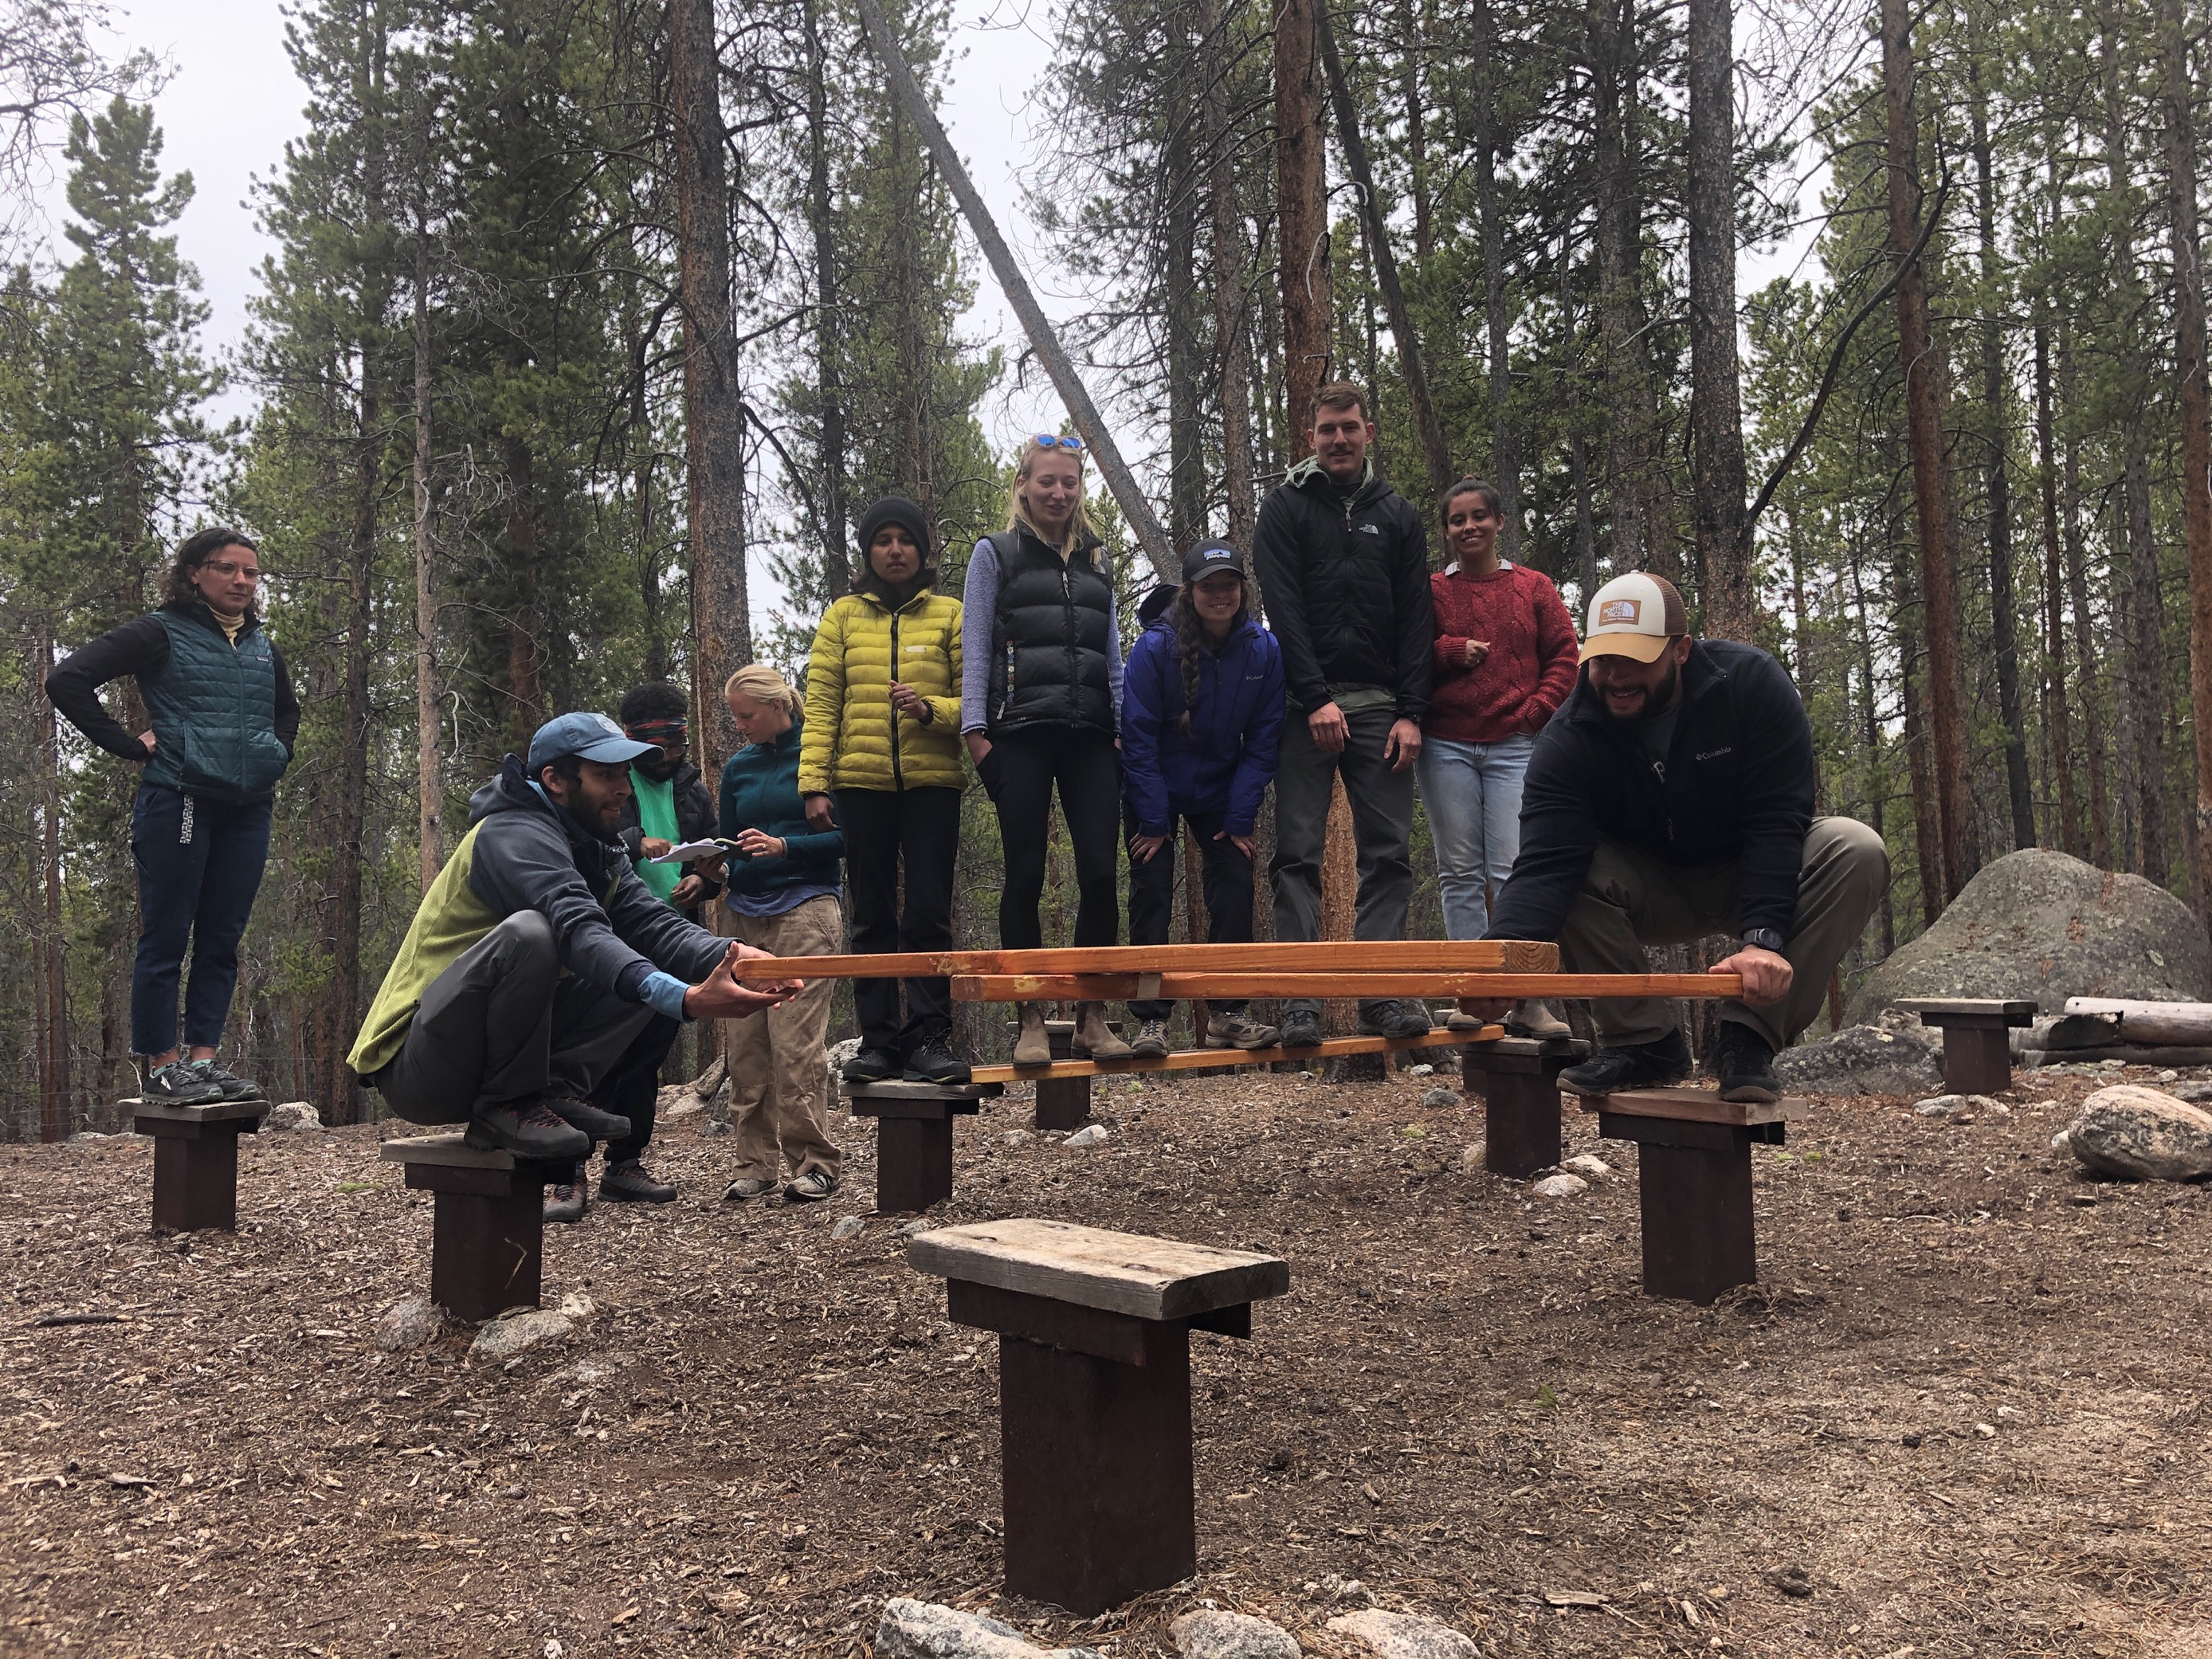 A group of people are standing on logs and other wooden platforms in the forest as part of a low-ropes initiative. Most of the group looks on while a pair of people move two boards in an effort to create a bridge for the others to pass. They are all wearing pants and jackets.